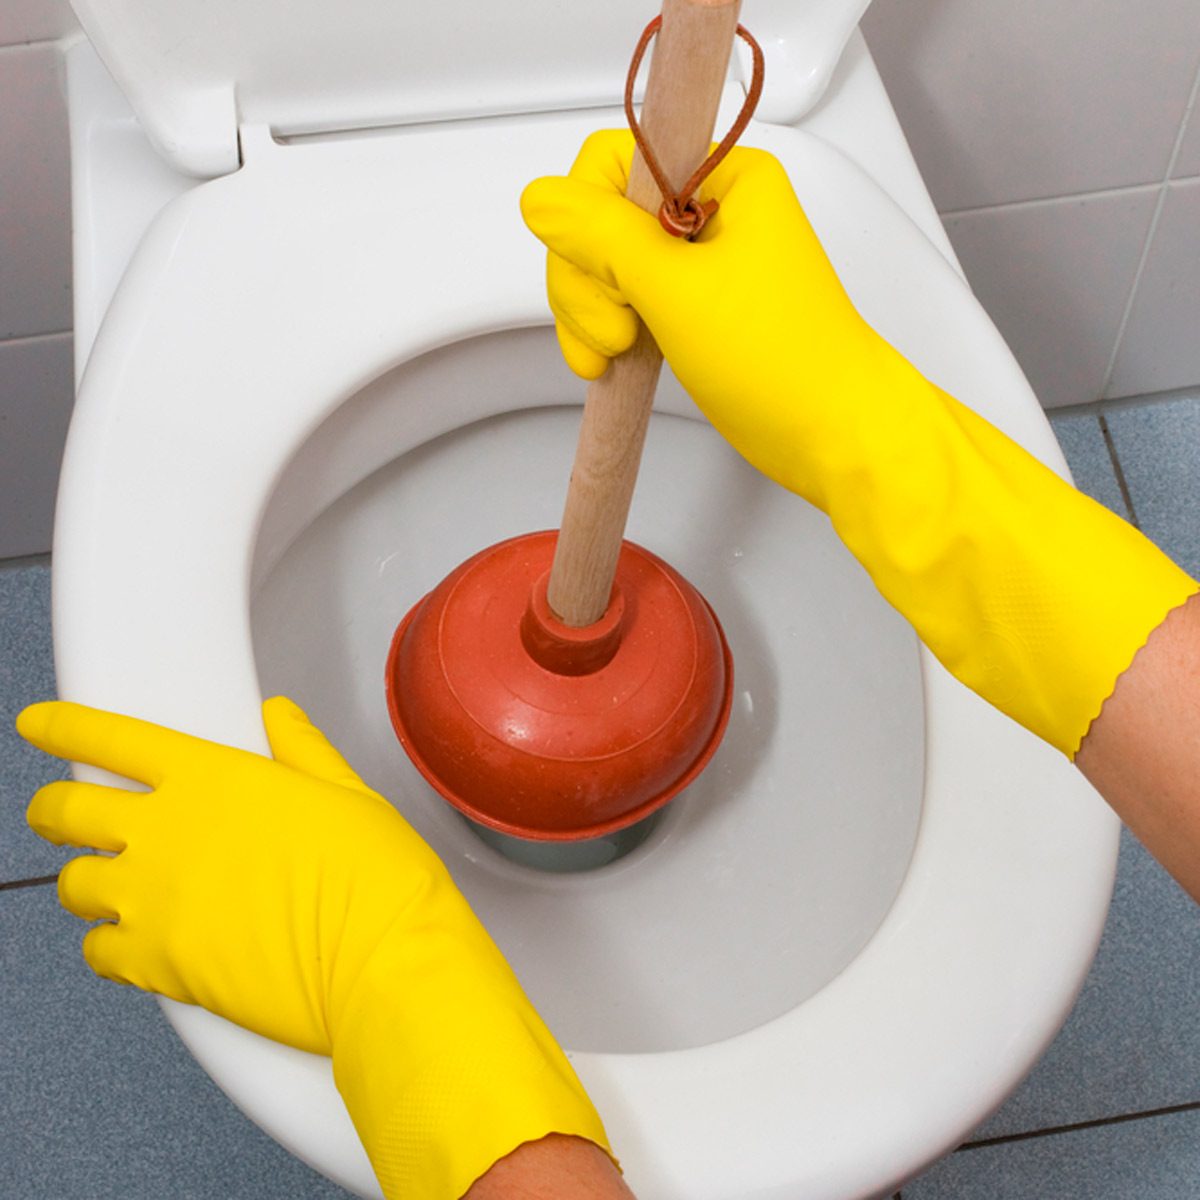 How To Plunge a Toilet the Right Way, According to Experts